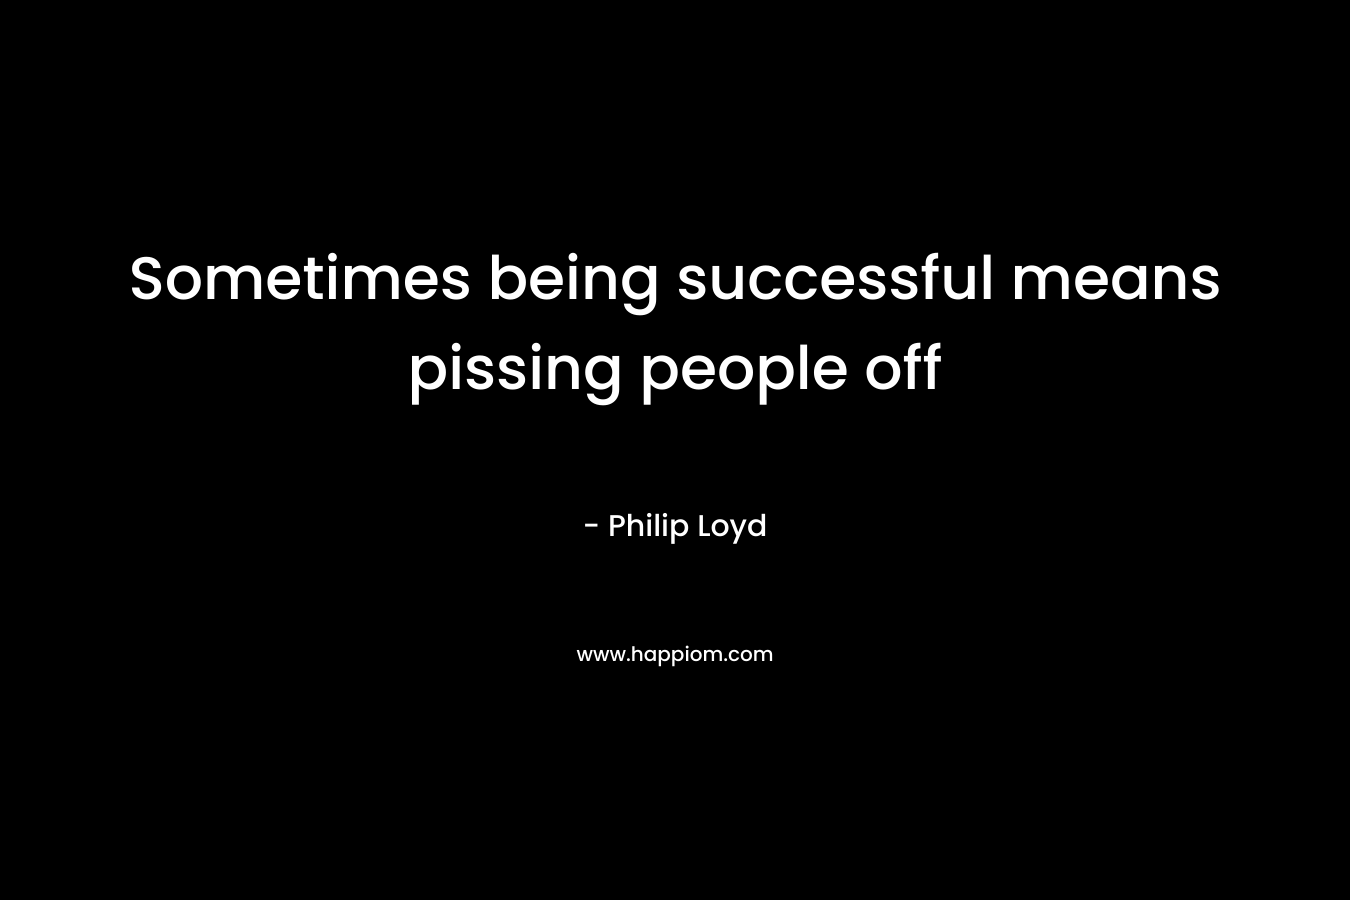 Sometimes being successful means pissing people off – Philip Loyd